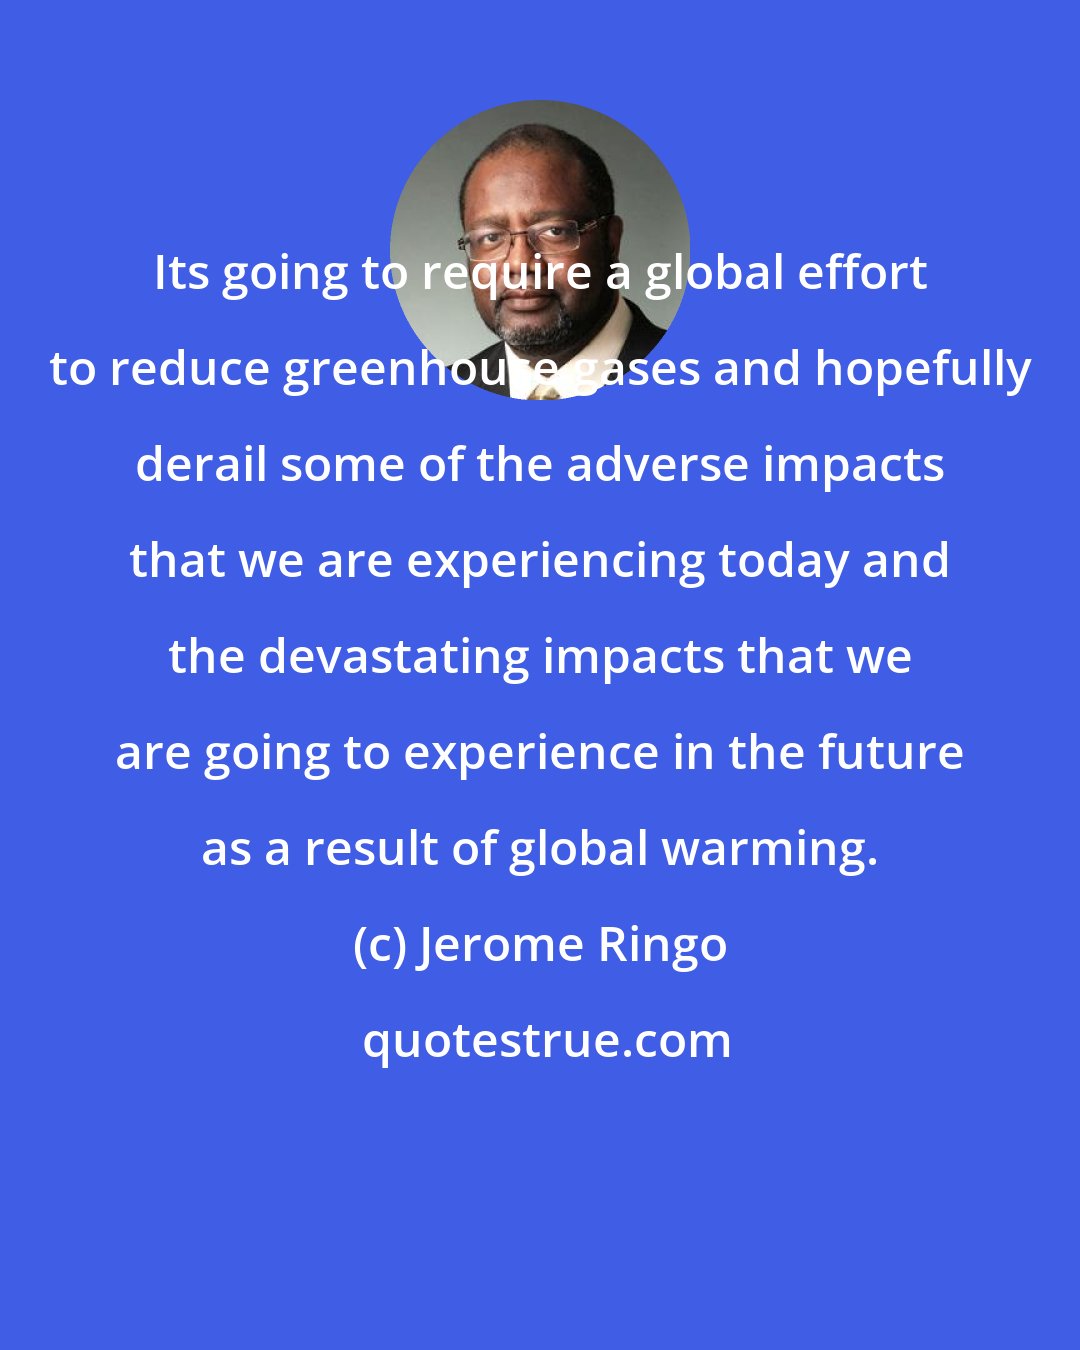 Jerome Ringo: Its going to require a global effort to reduce greenhouse gases and hopefully derail some of the adverse impacts that we are experiencing today and the devastating impacts that we are going to experience in the future as a result of global warming.